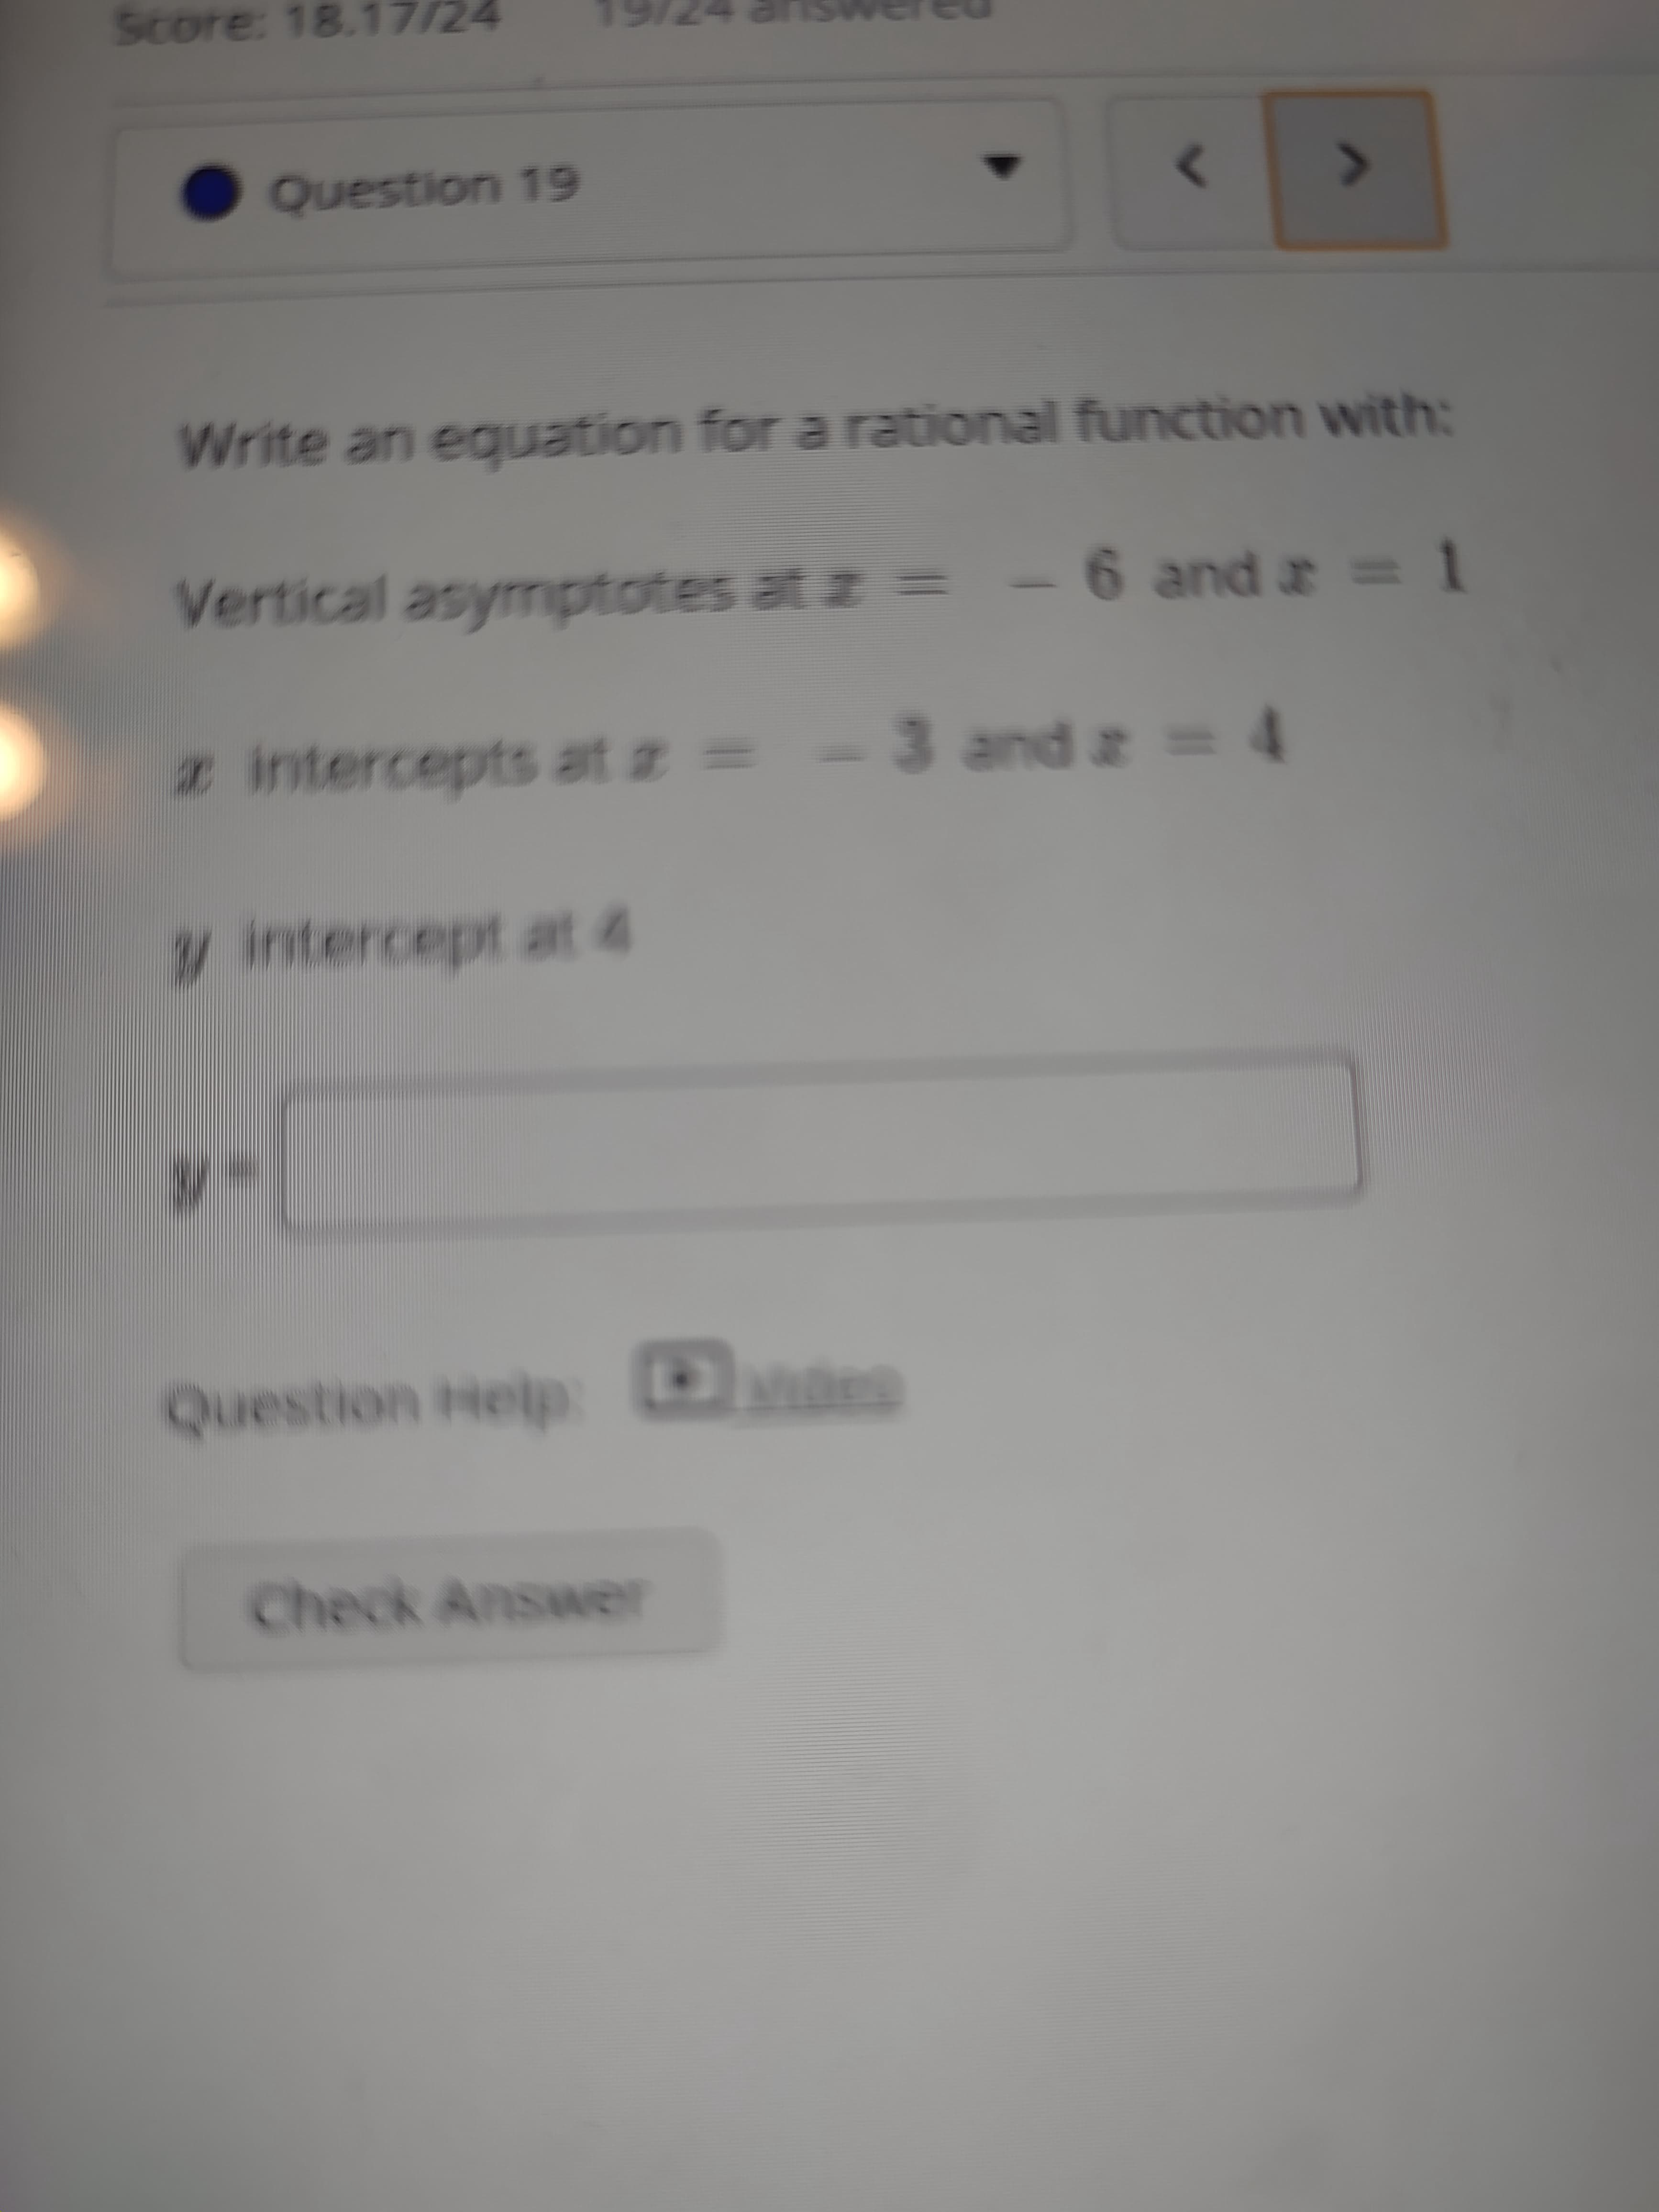 Write an equation for a rational function with:
Vertical asymptotes at z =
6 and a 1
a intercepts at z =
3 and z 4
y intercept at 4
